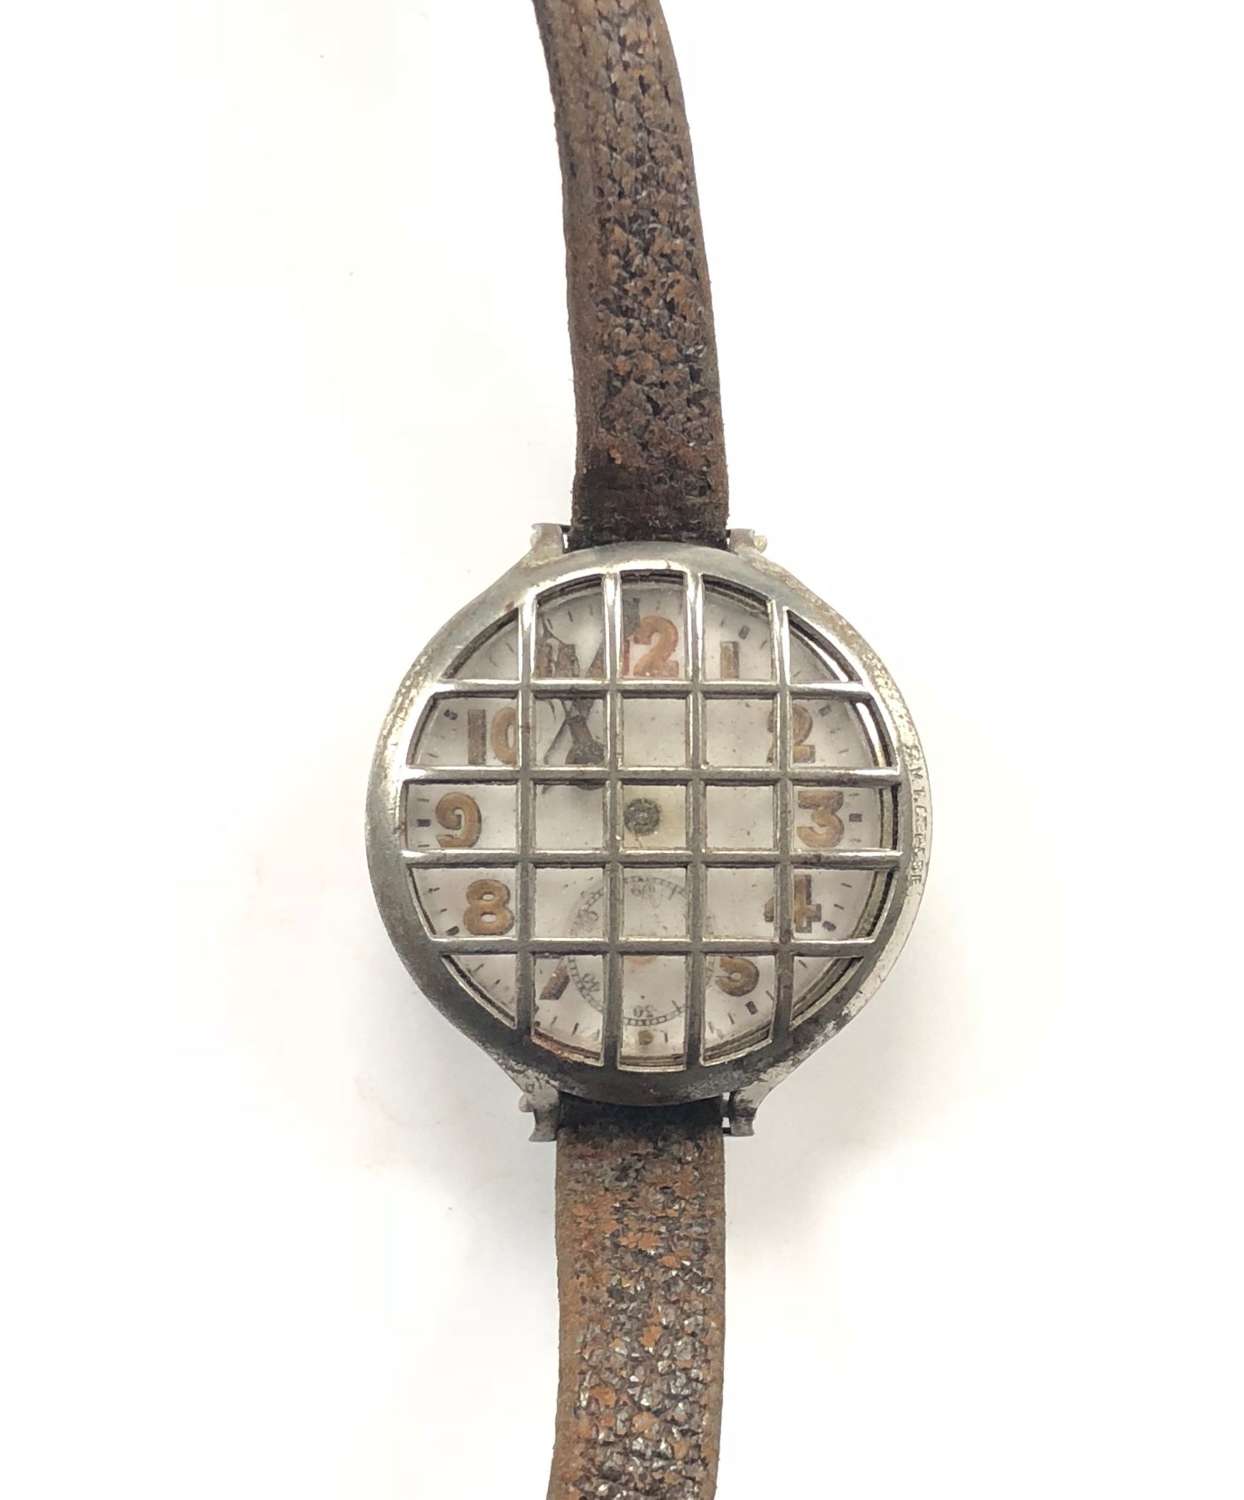 WW1 Officer’s Trench Watch with Cover.